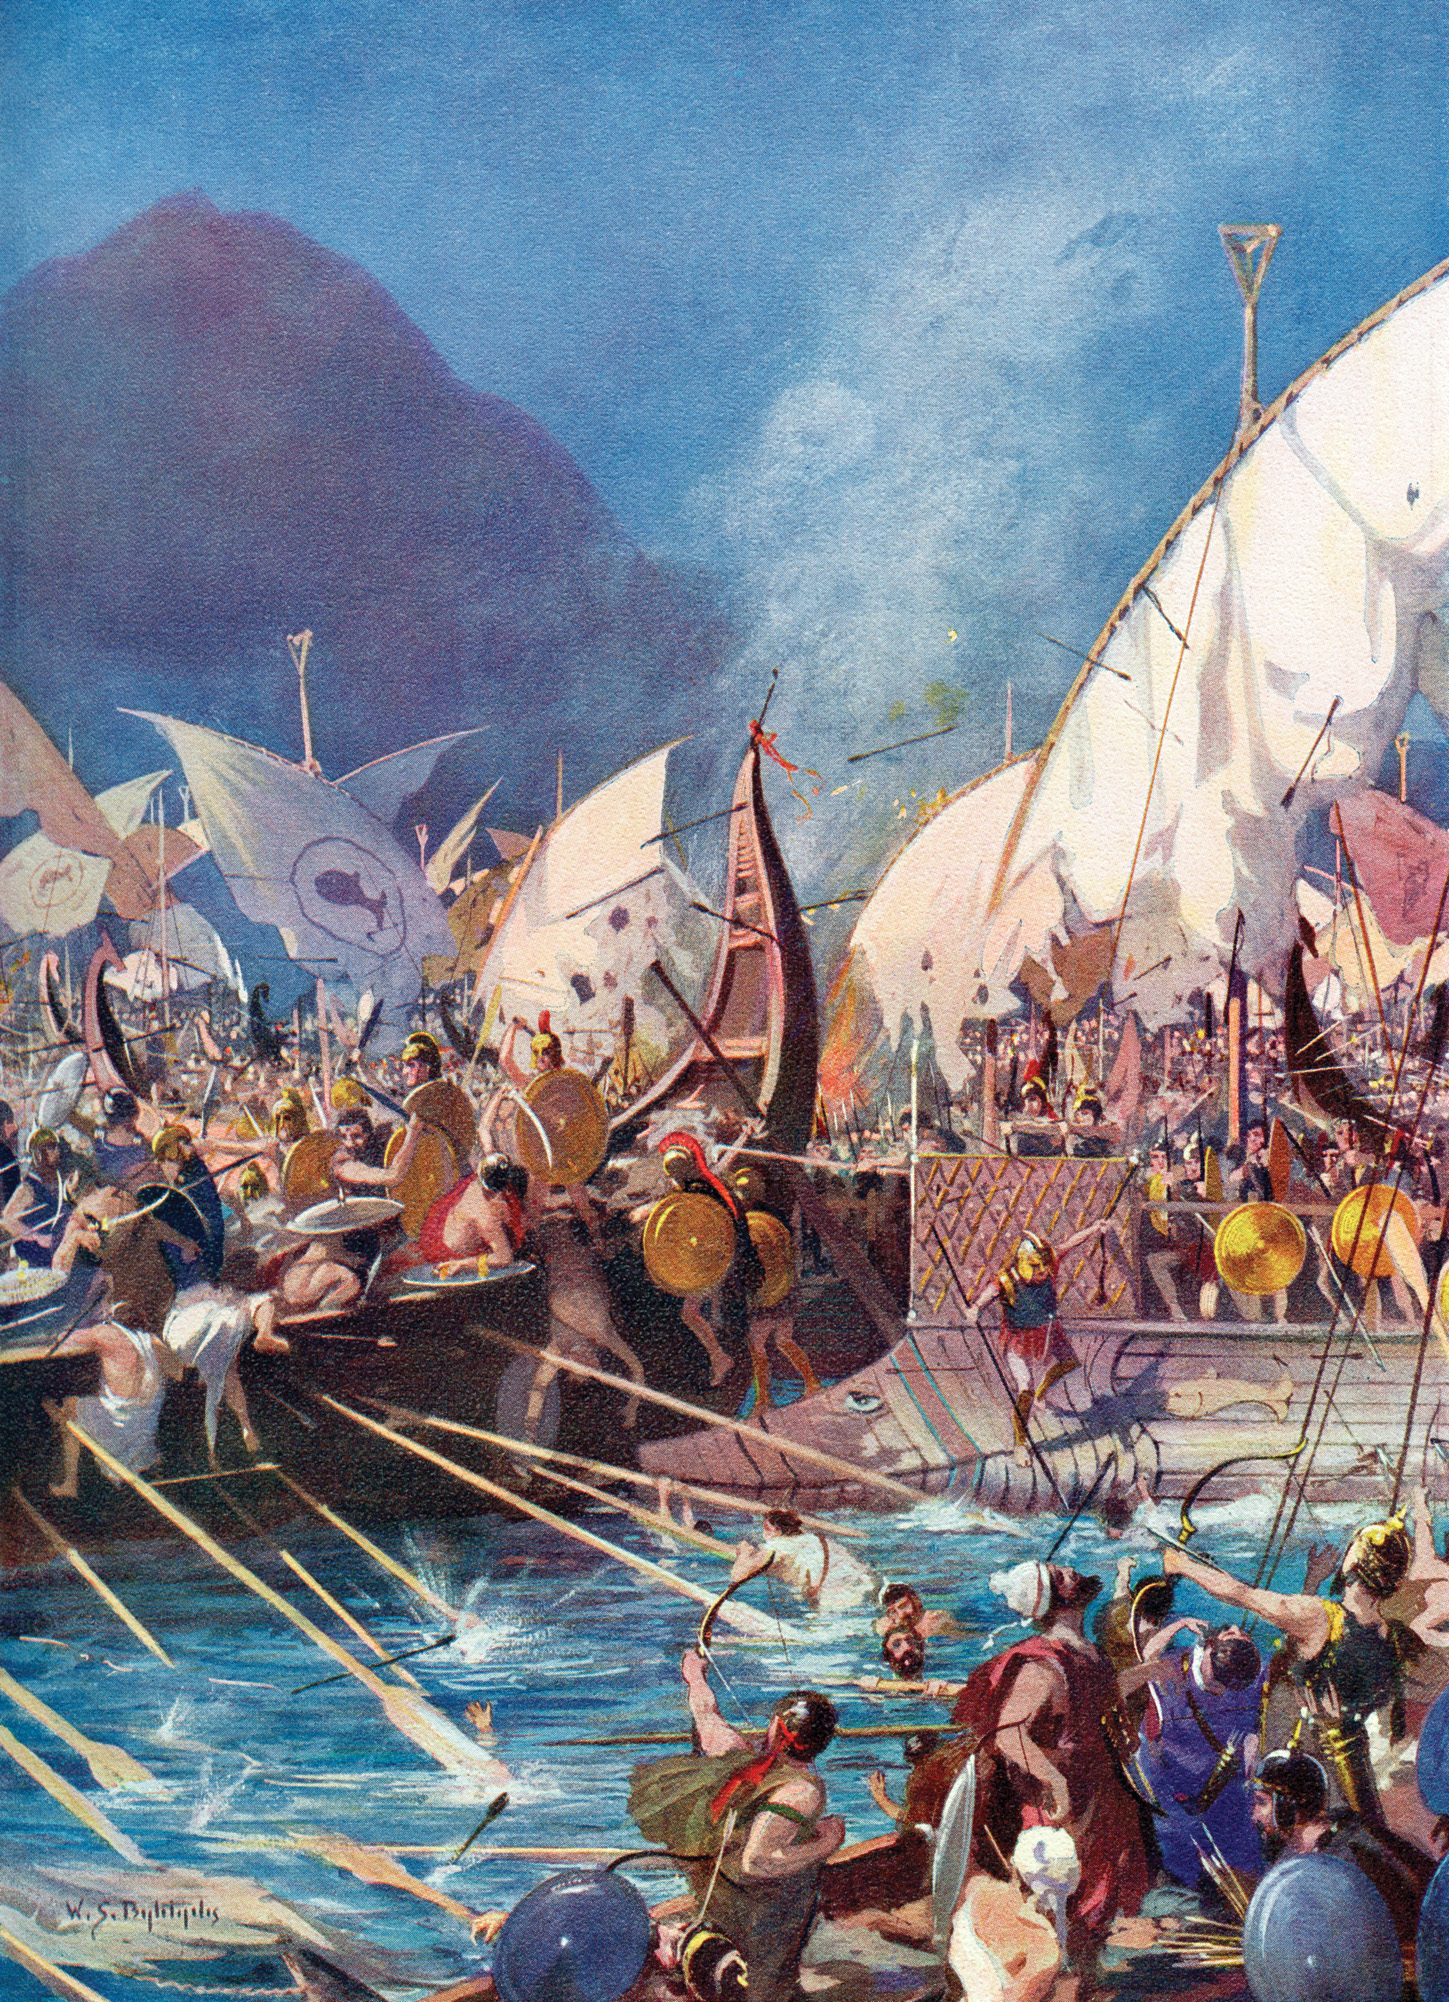 Boarding parties tangled in bloody melees when the ships became locked together as a result of ramming. Eventually the Greeks prevailed, and the remaining intact Persian vessels fled to safer waters